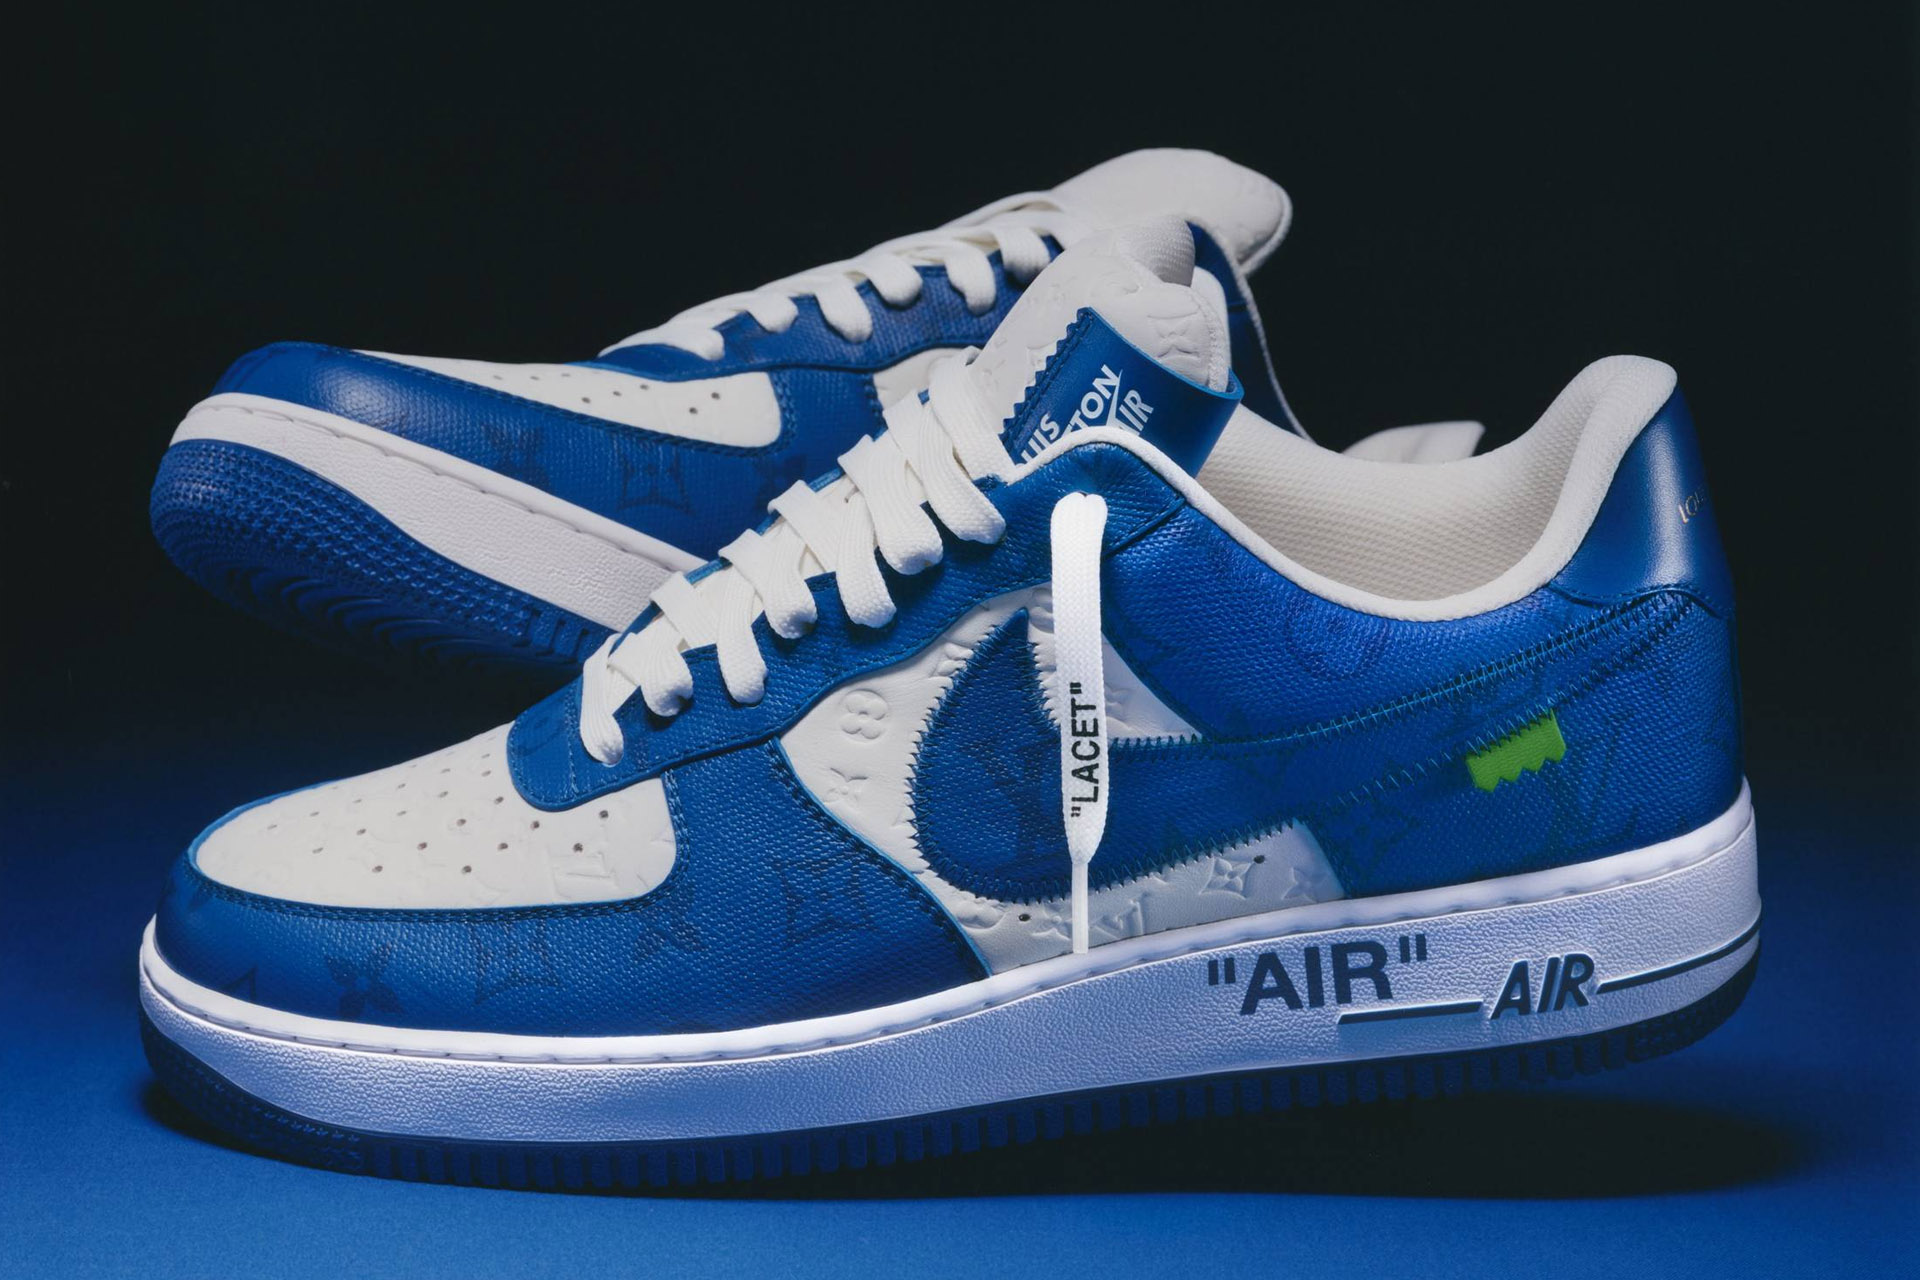 200 pairs of Virgil Abloh shoes fetch $25 million at Sotheby's auction